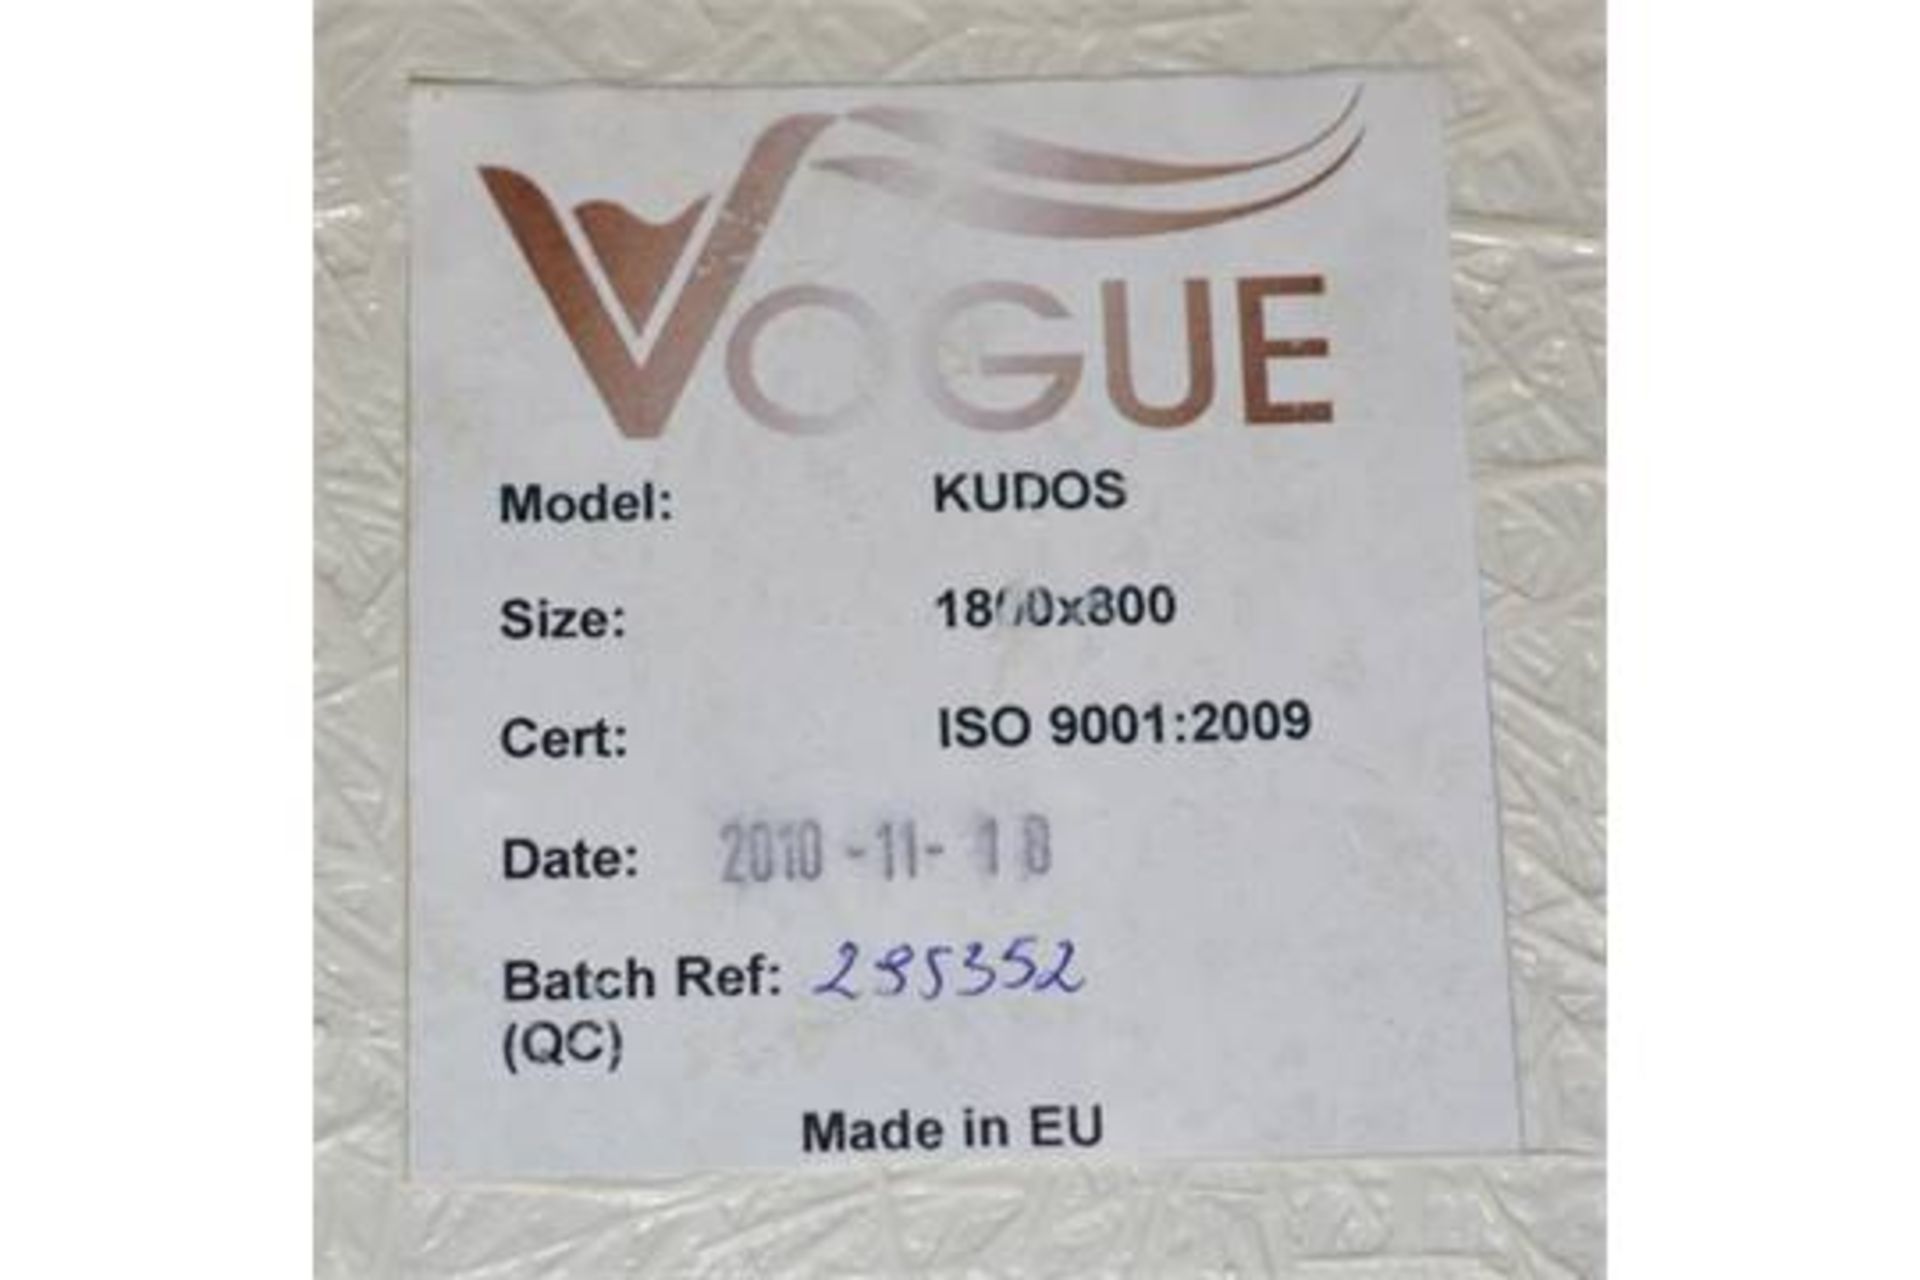 1 x Kudos Single End Inset Bath Tub - Vogue Bathrooms - 1800x800mm - Brand New Stock - Ref P6 - High - Image 4 of 4